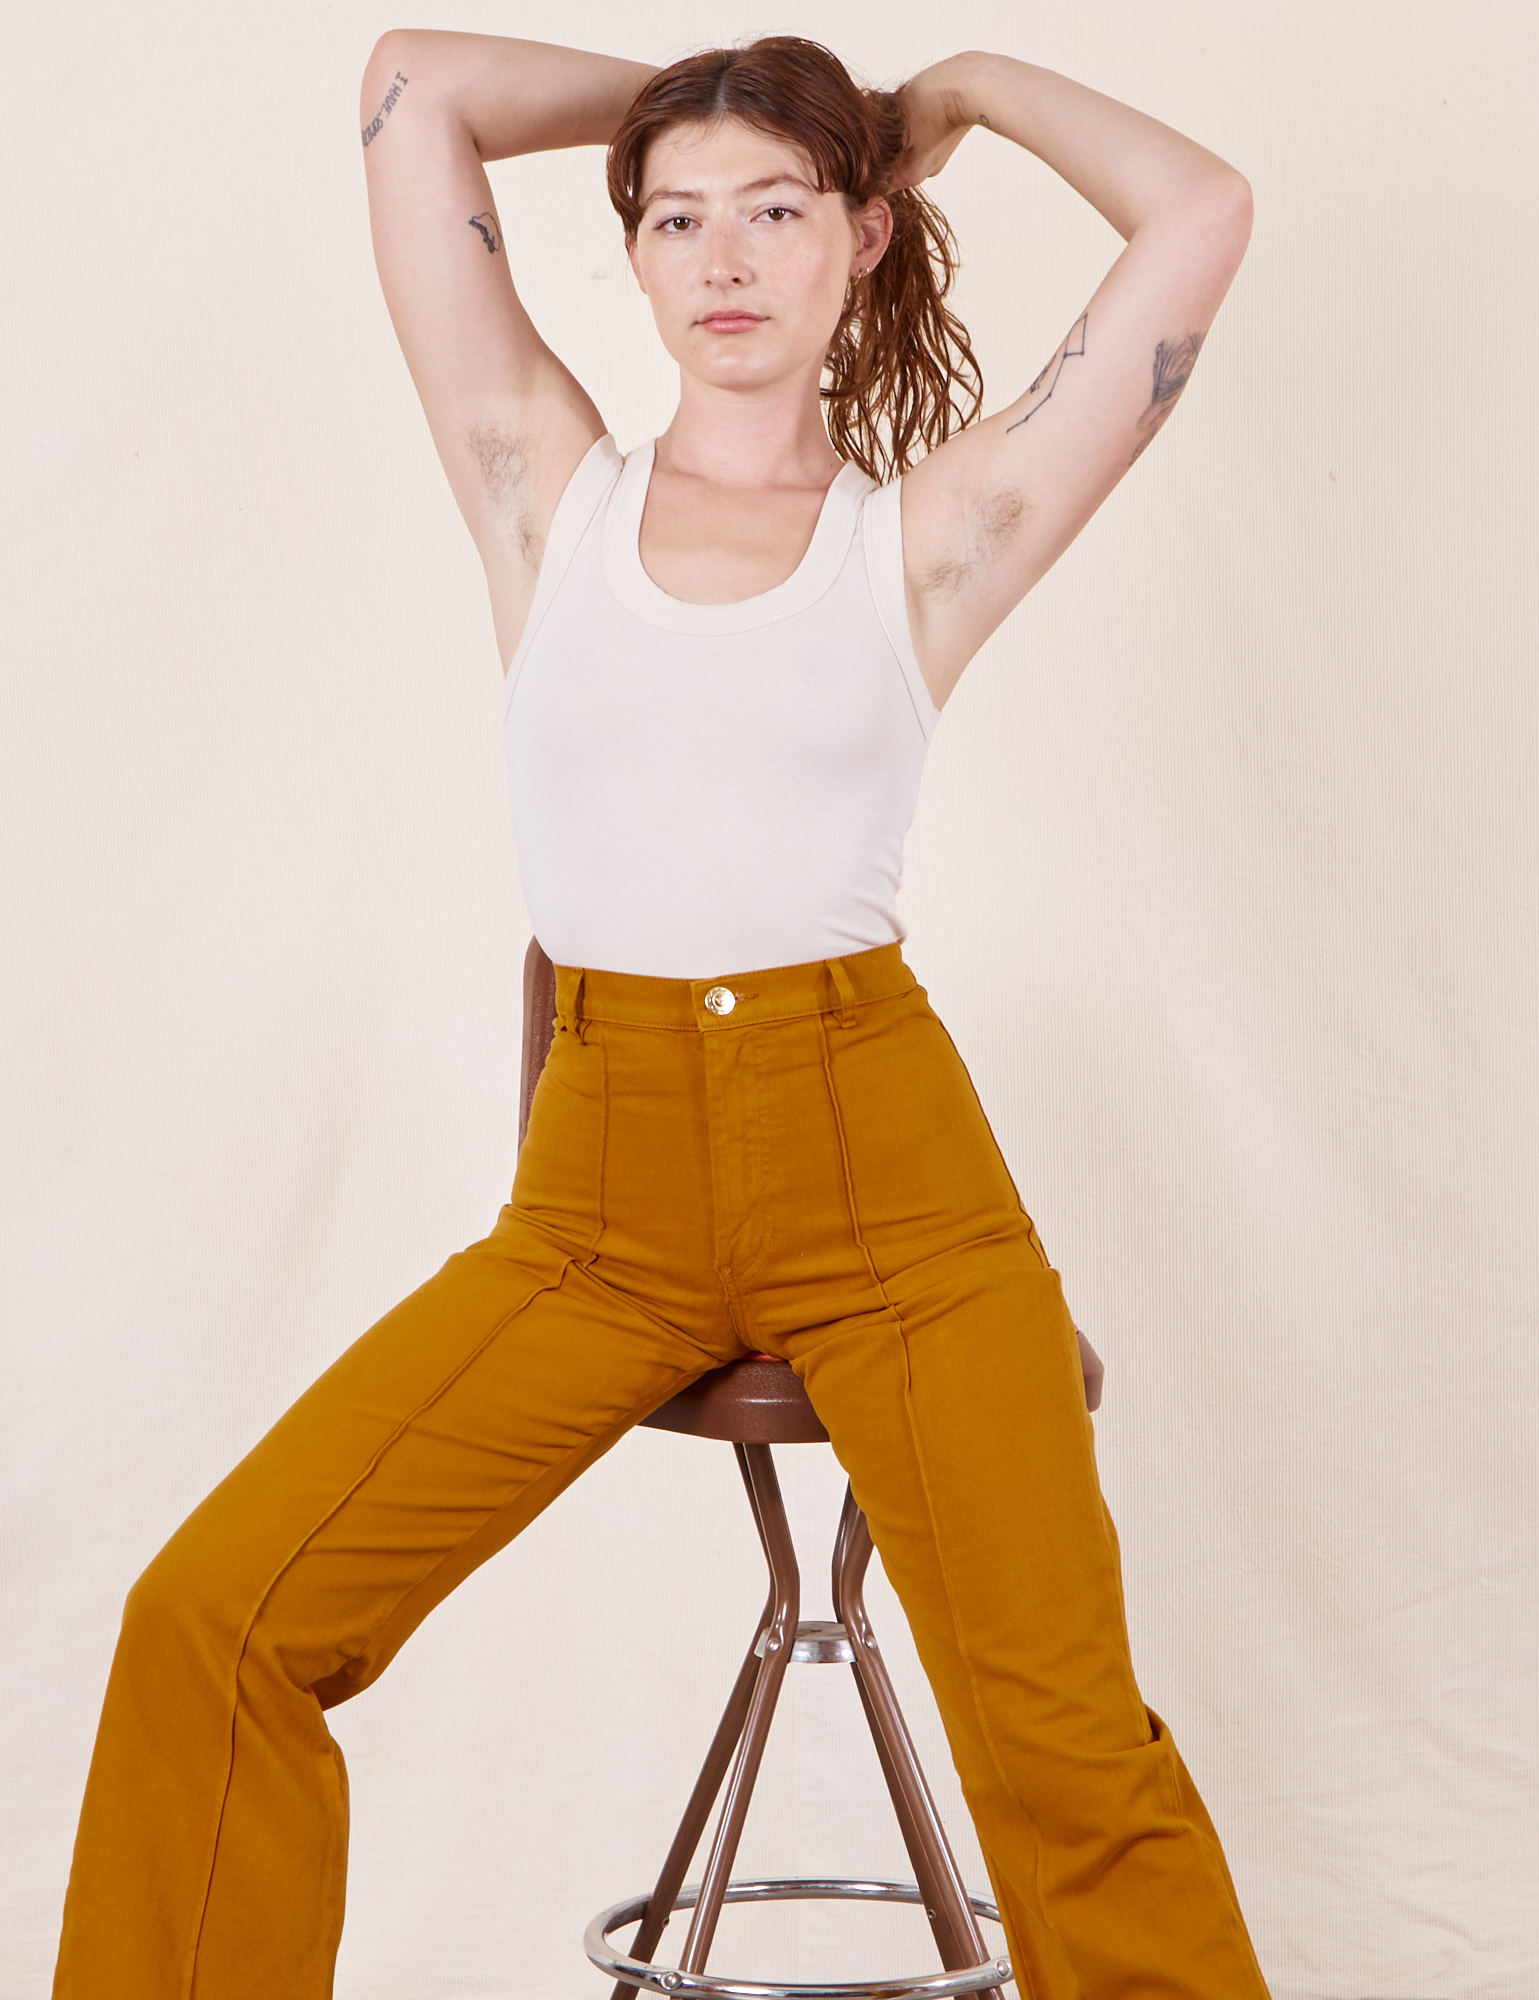 Alex is wearing Western Pants in Spicy Mustard and vintage off-white Tank Top